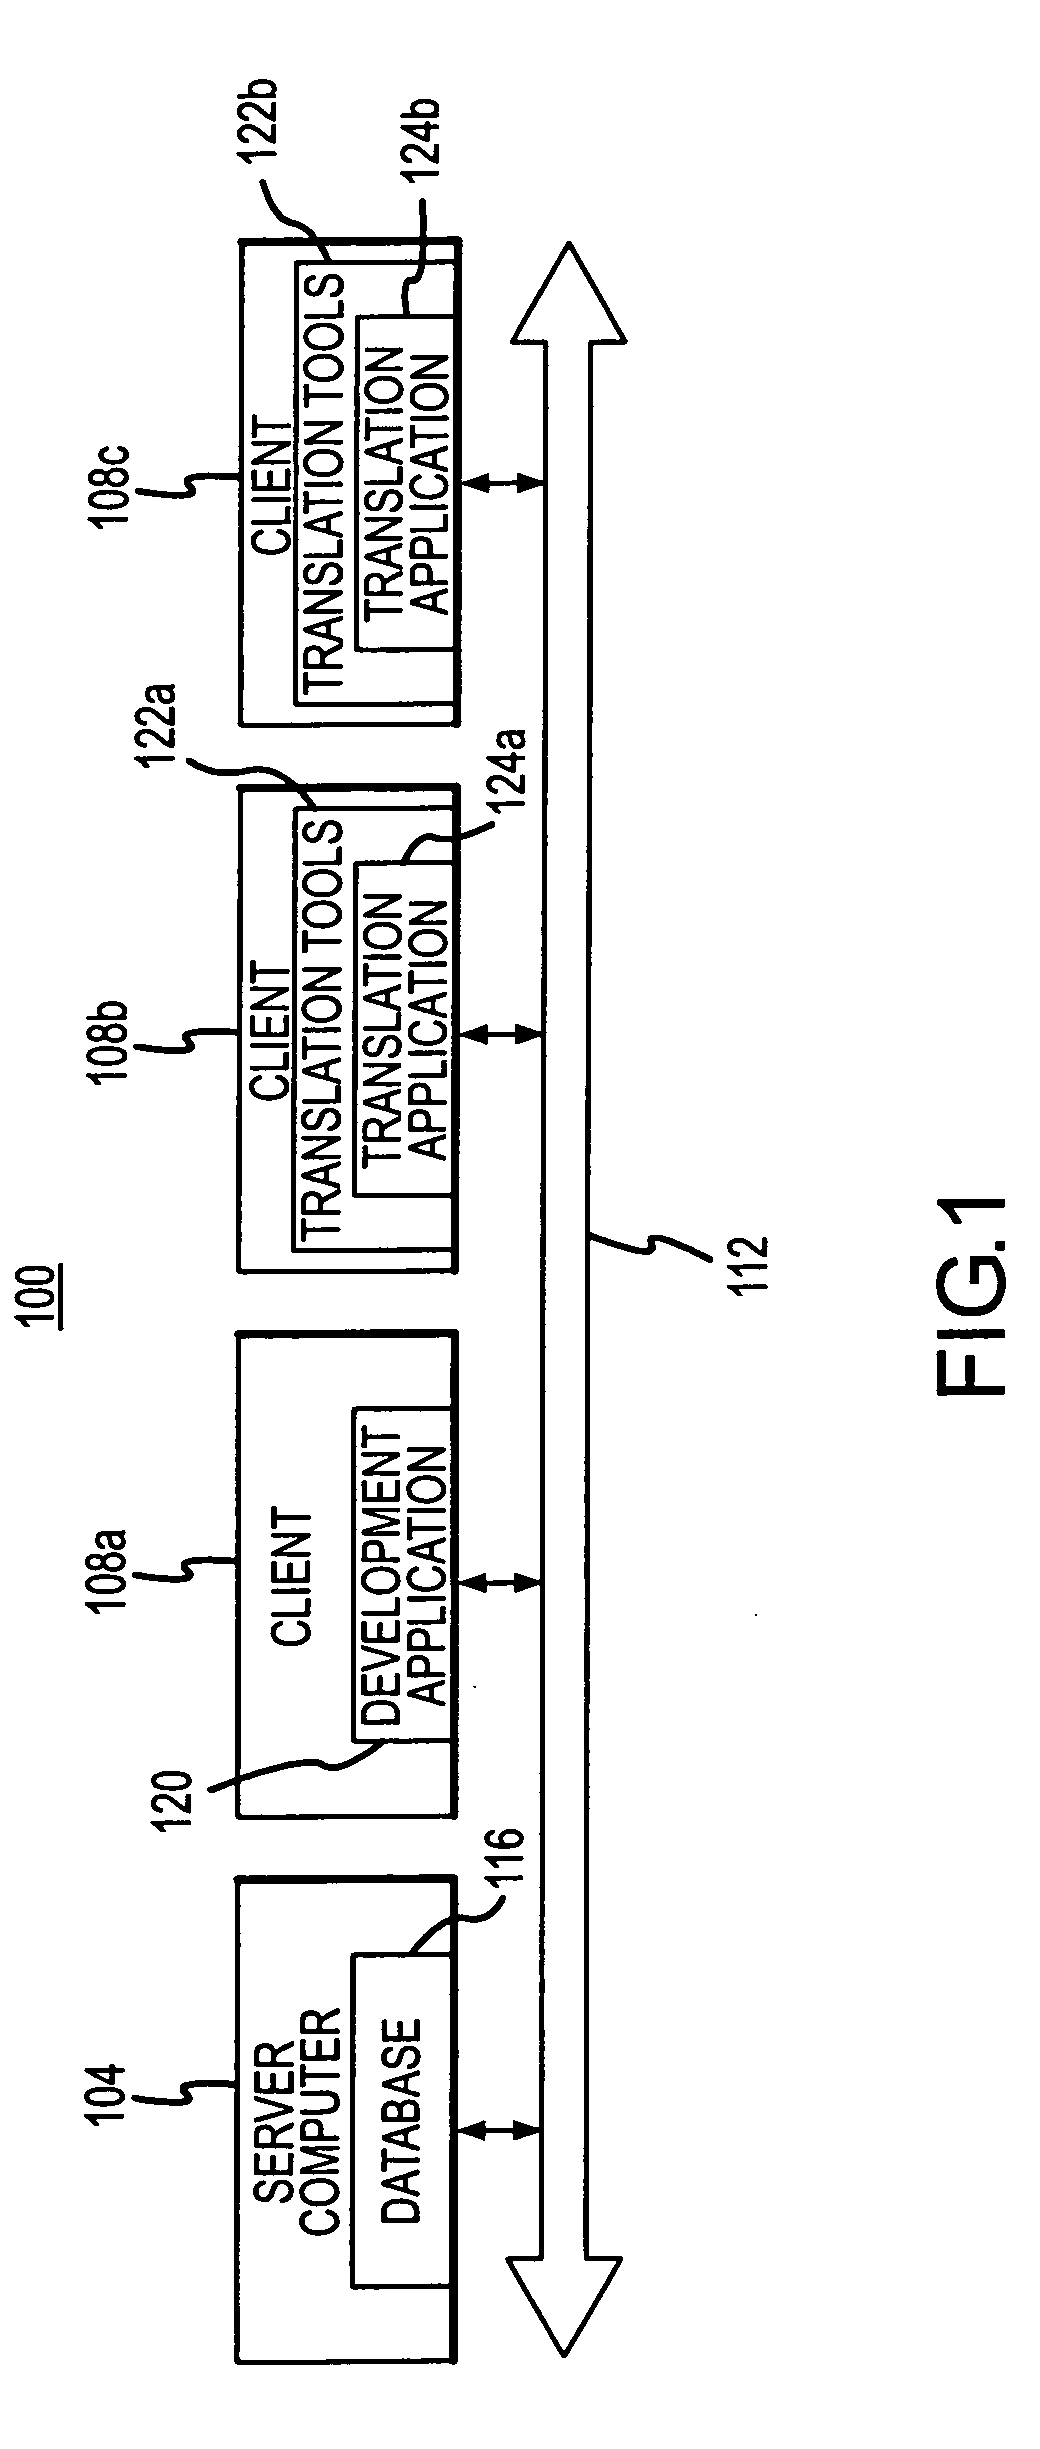 Method and apparatus for translating computer programs